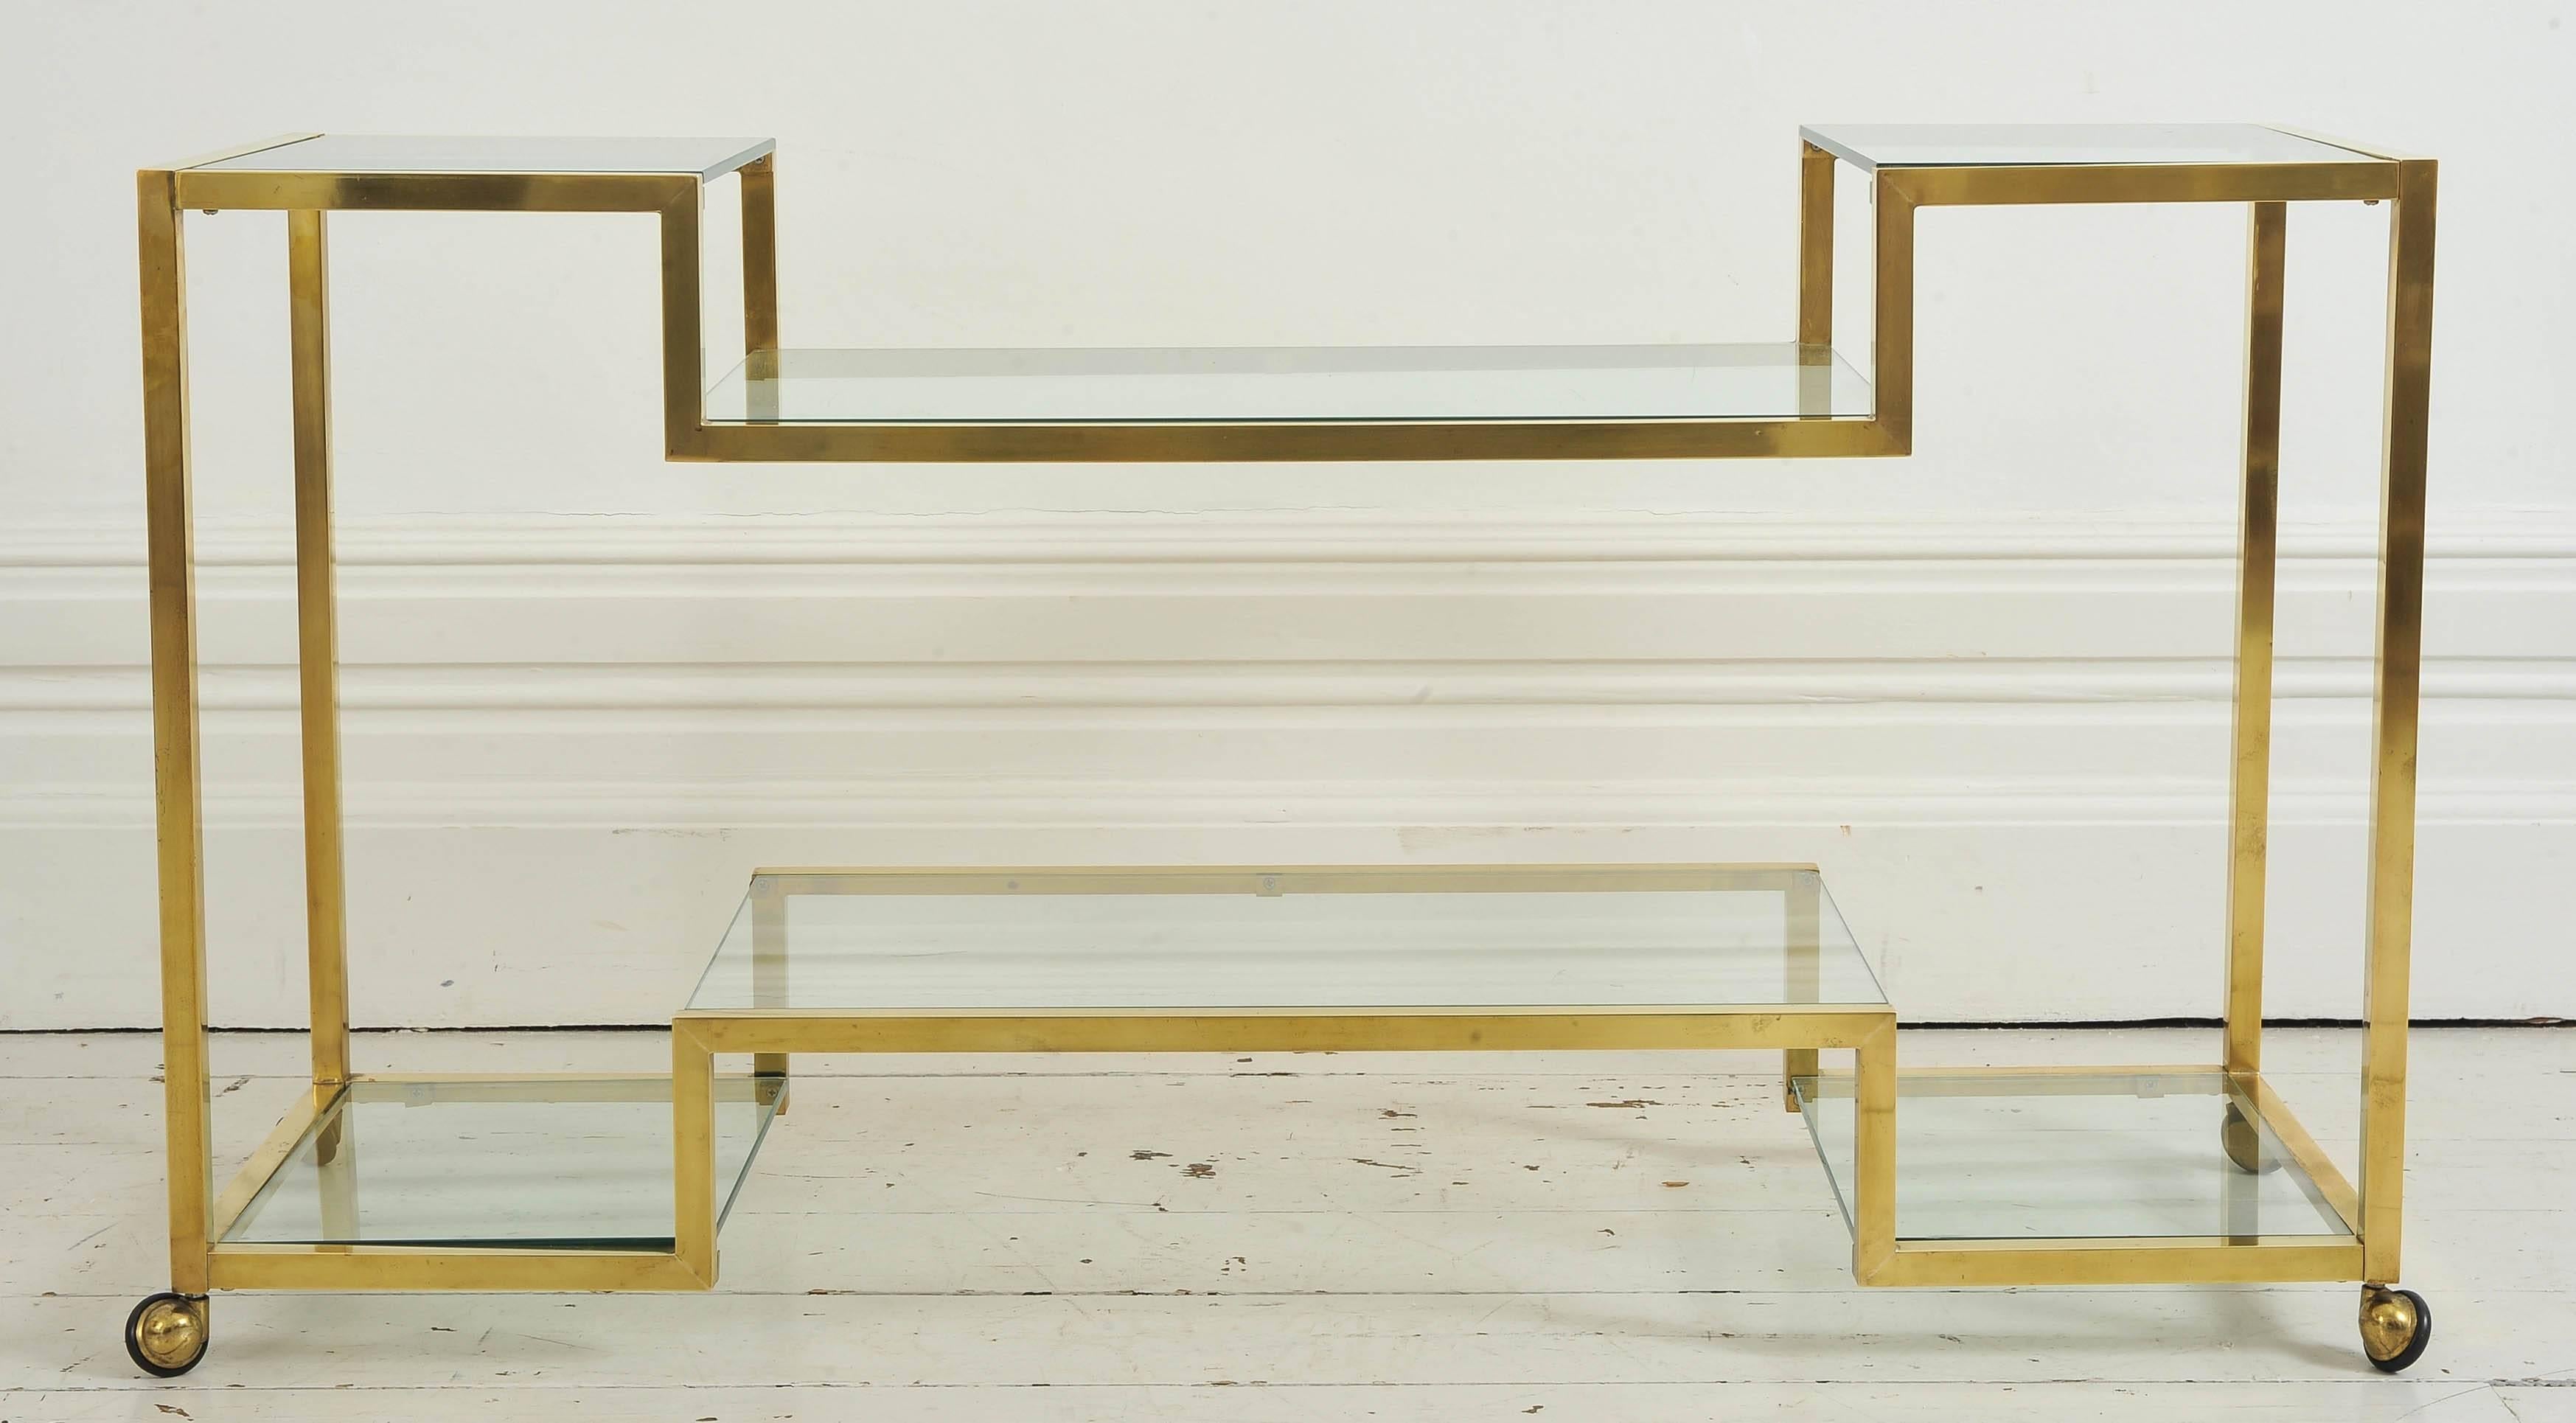 This lovely brass console has wheels and removable glass shelves.

Shipping: We are happy to ship this item to you for an additional cost. Please contact us for a quote.